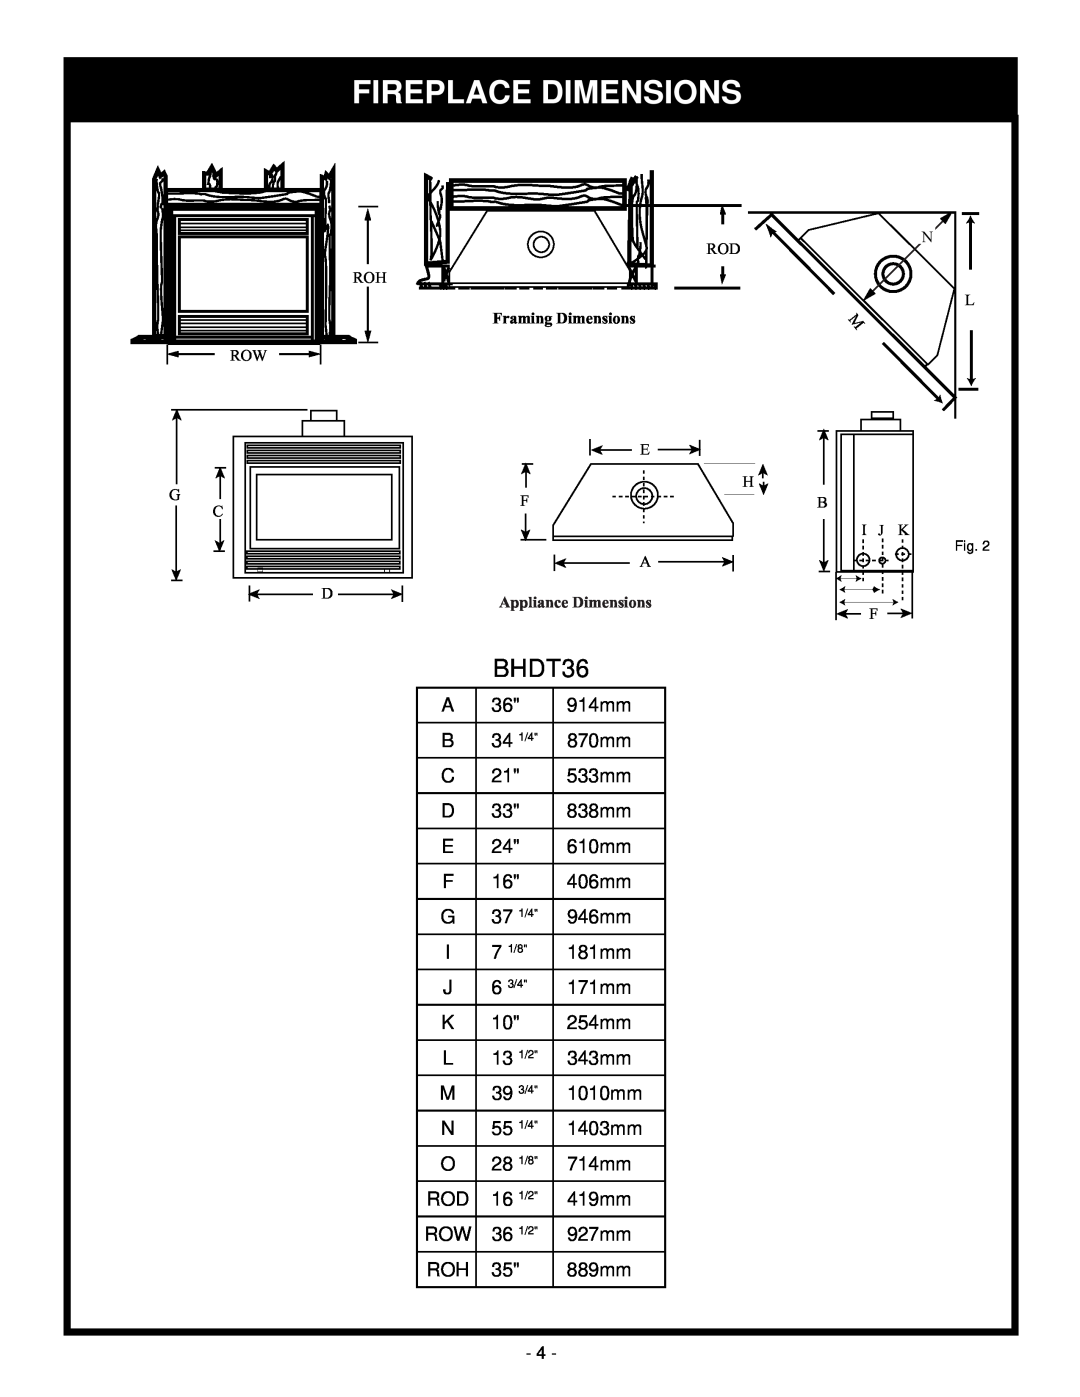 Vermont Casting BHDT36 installation instructions Fireplace Dimensions 